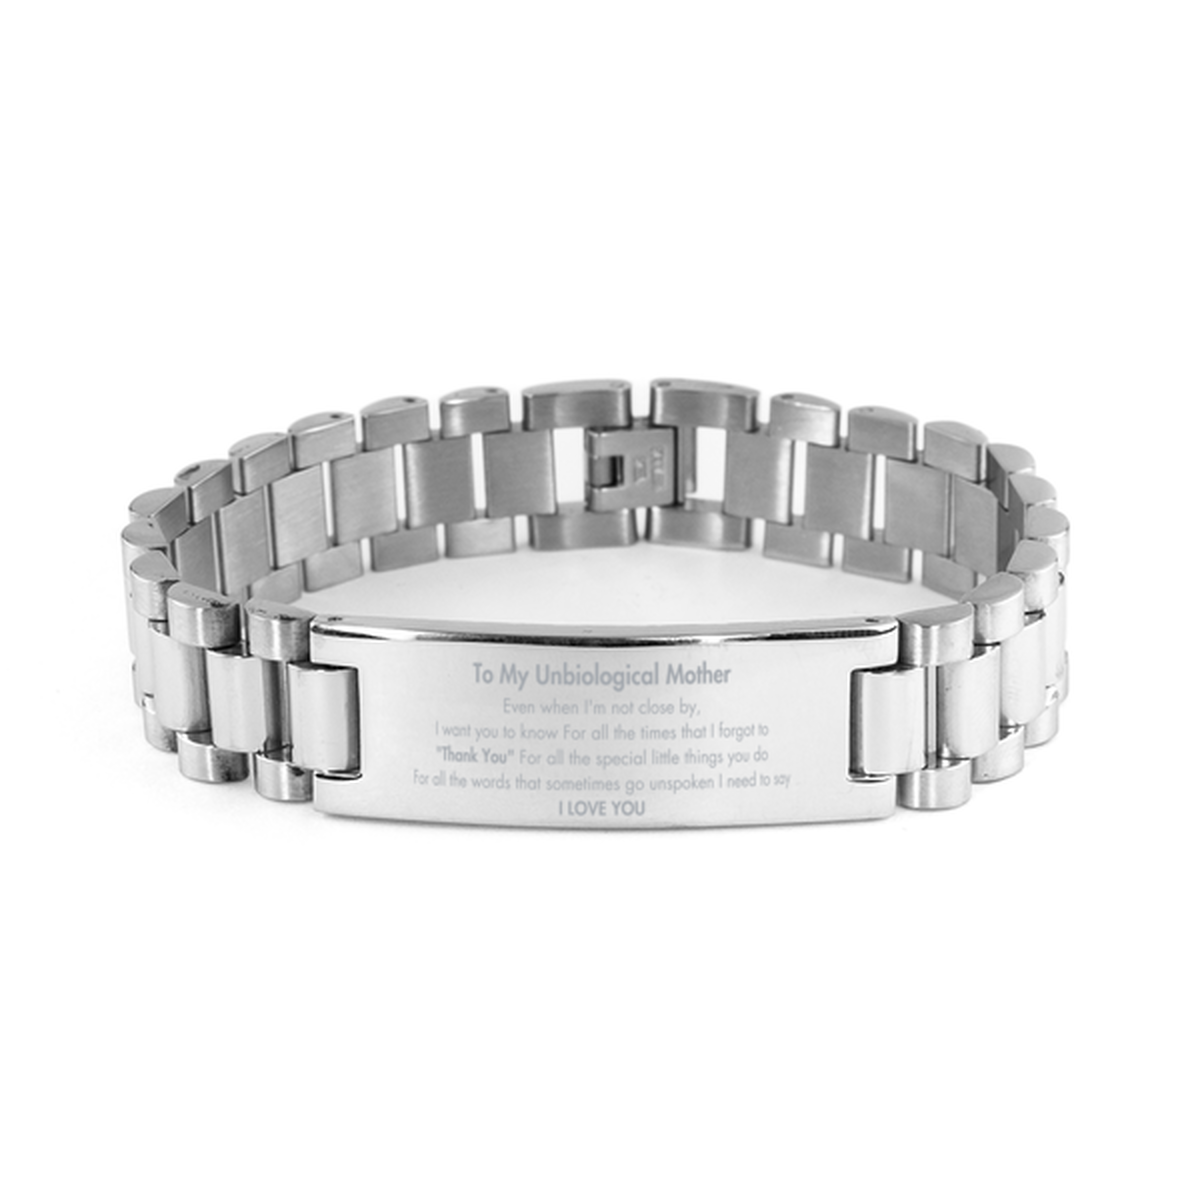 Thank You Gifts for Unbiological Mother, Keepsake Ladder Stainless Steel Bracelet Gifts for Unbiological Mother Birthday Mother's day Father's Day Unbiological Mother For all the words That sometimes go unspoken I need to say I LOVE YOU